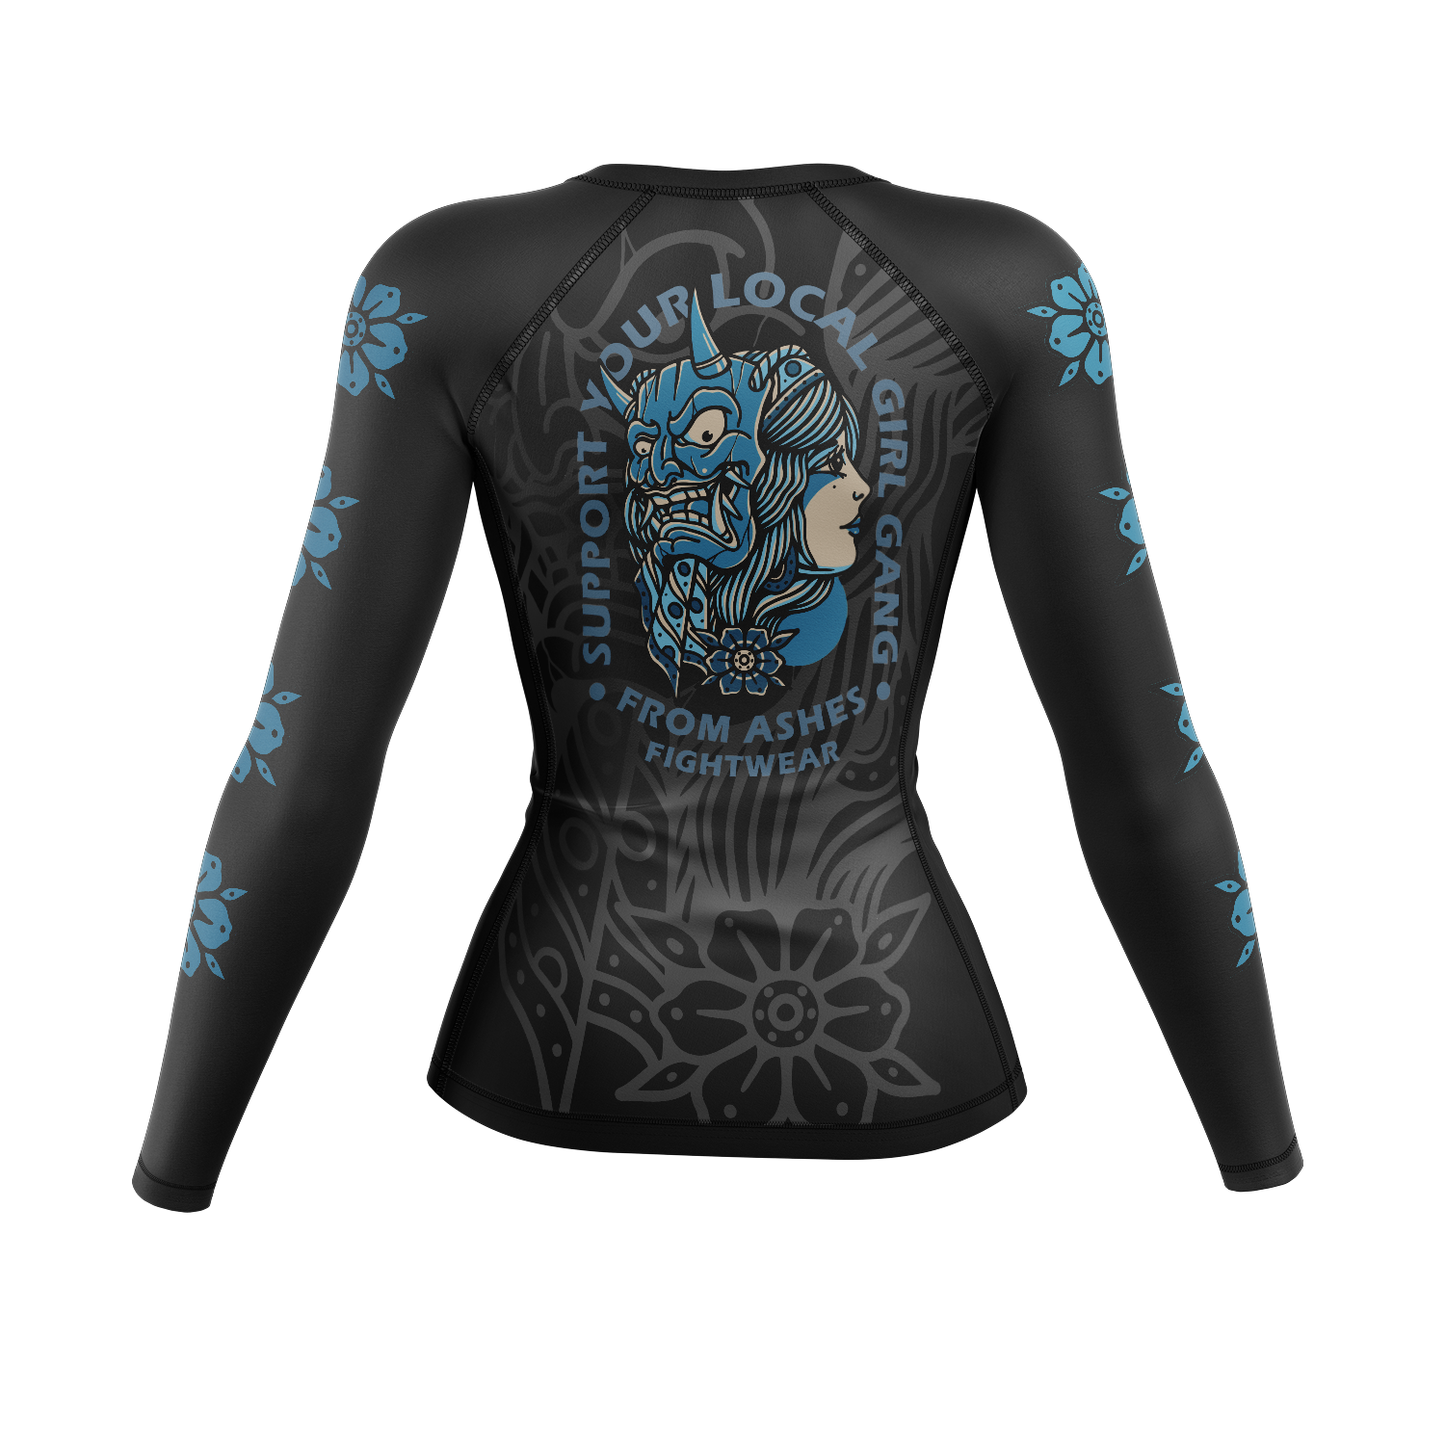 Women's Fit Girl Gang Ranked Rashguard – From Ashes Fightwear